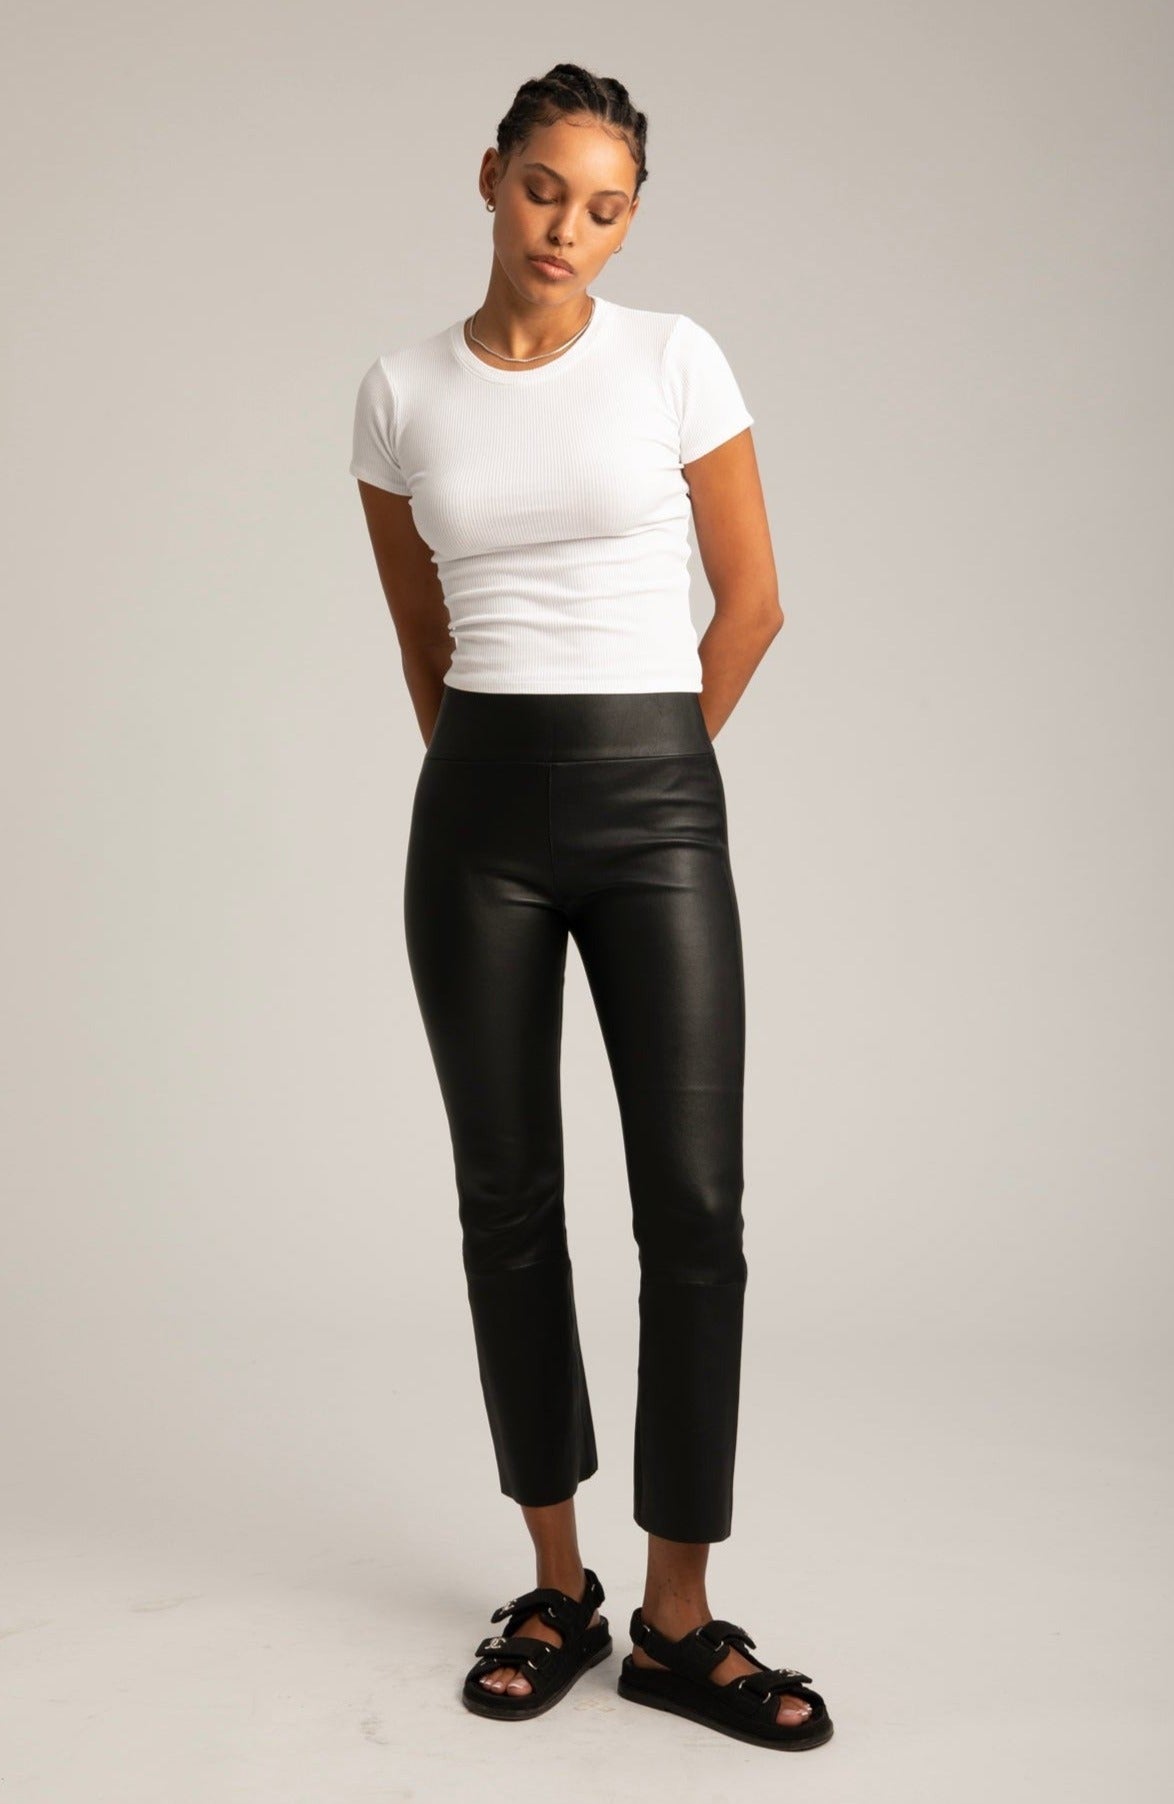 High Waisted Faux Leather Leggings Available In Store. Sizes S-M, M-L